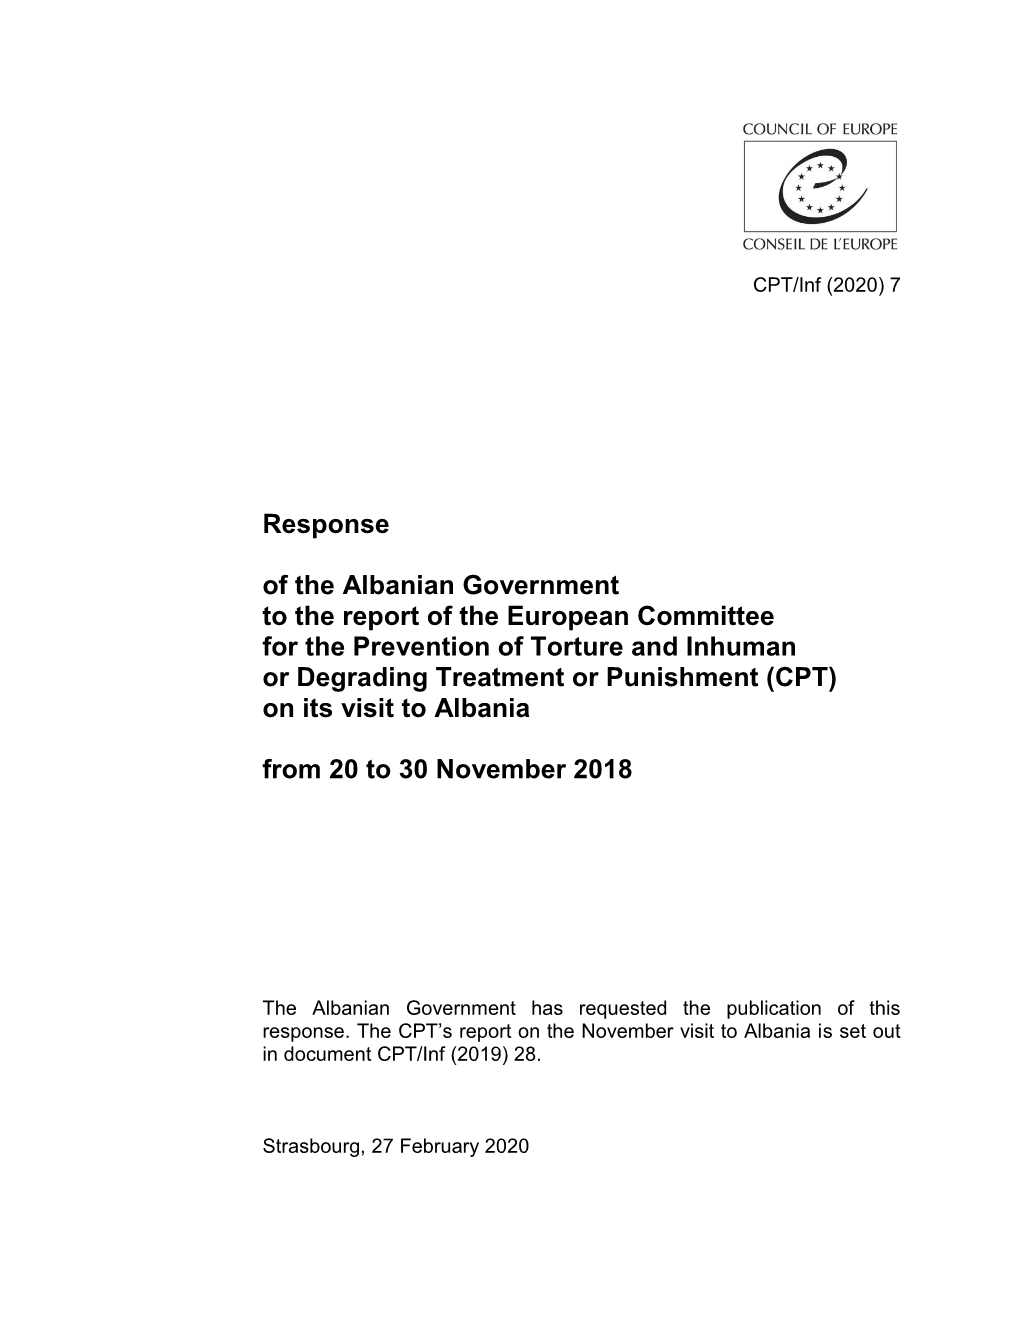 Response of the Albanian Government to the Report of The